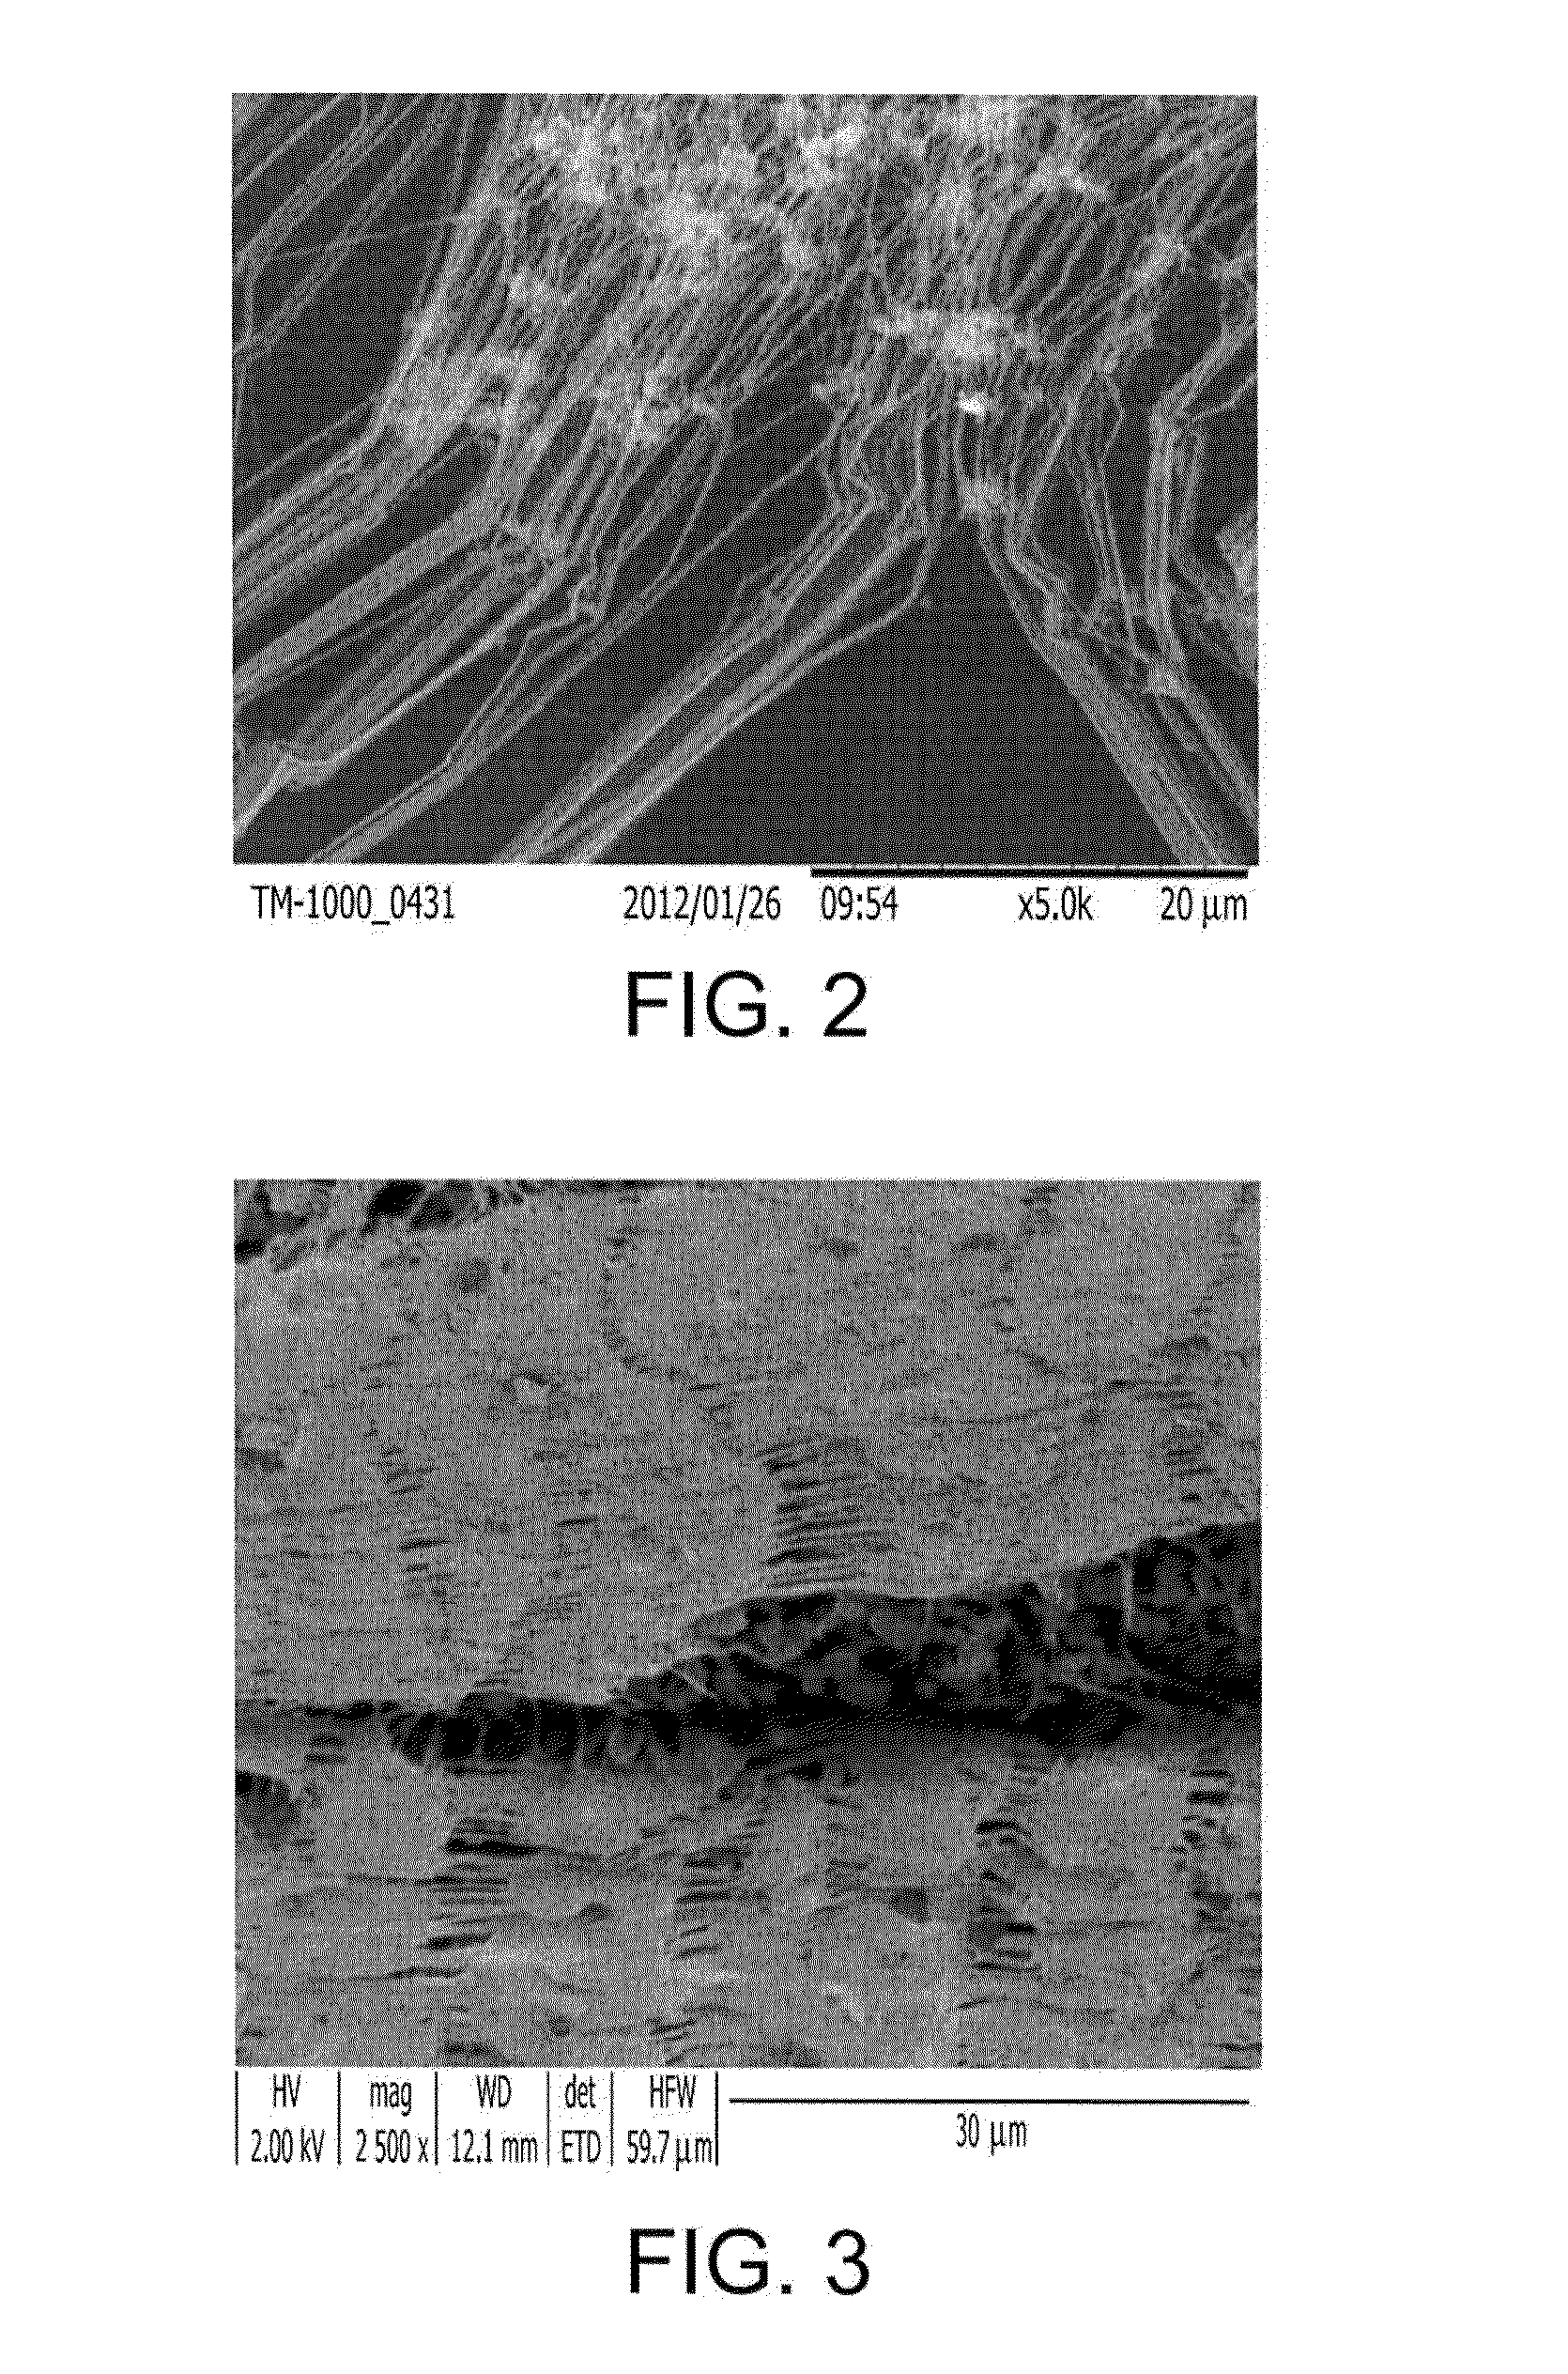 Seam-Sealed Filters and Methods of Making Thereof